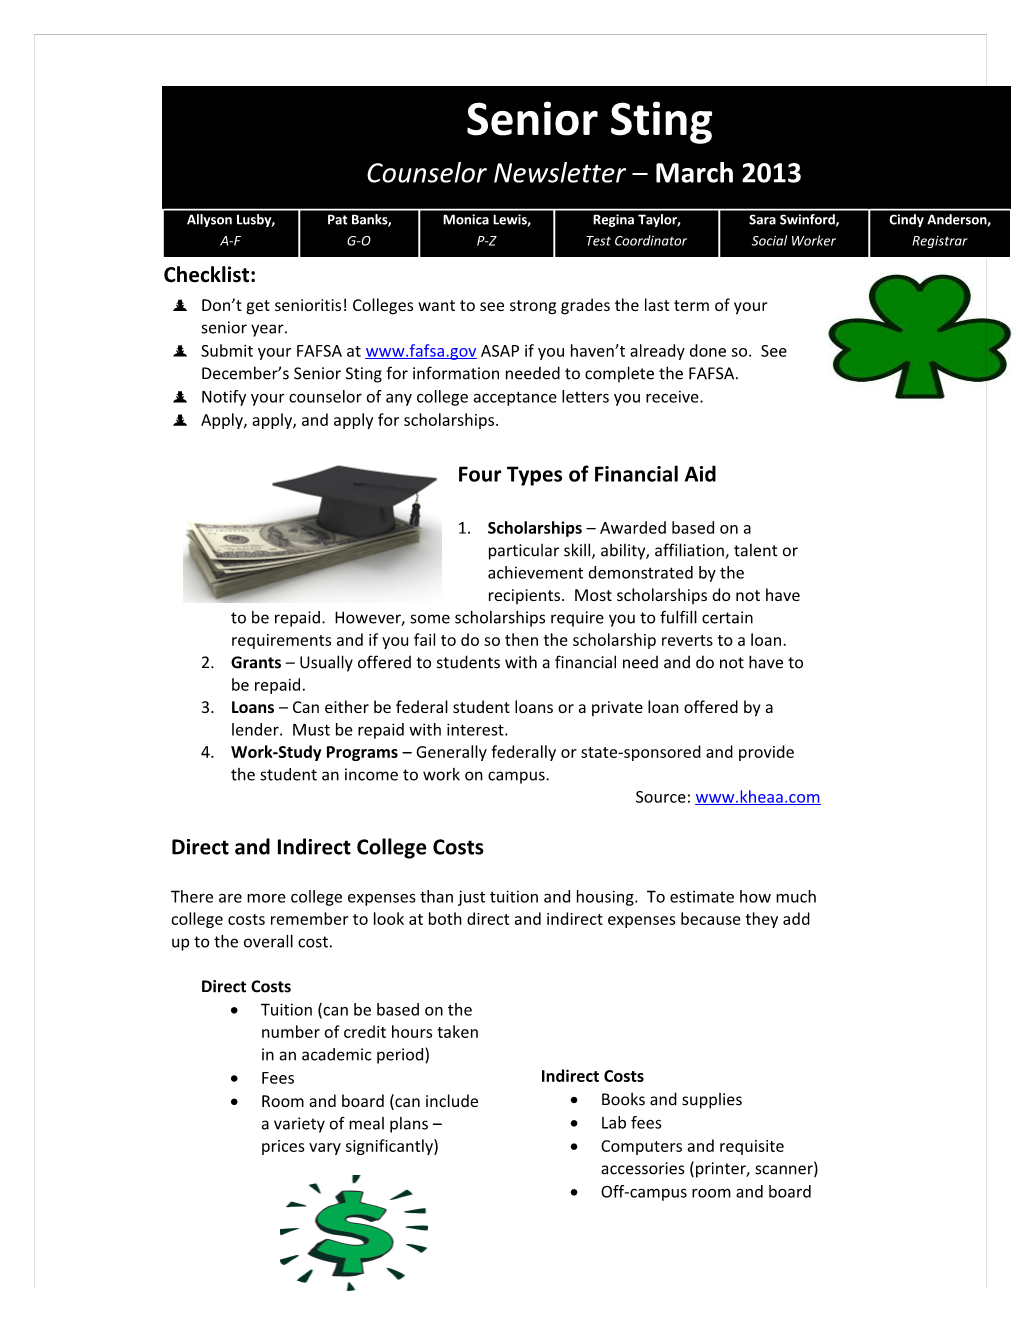 Notify Your Counselor of Any College Acceptance Letters You Receive